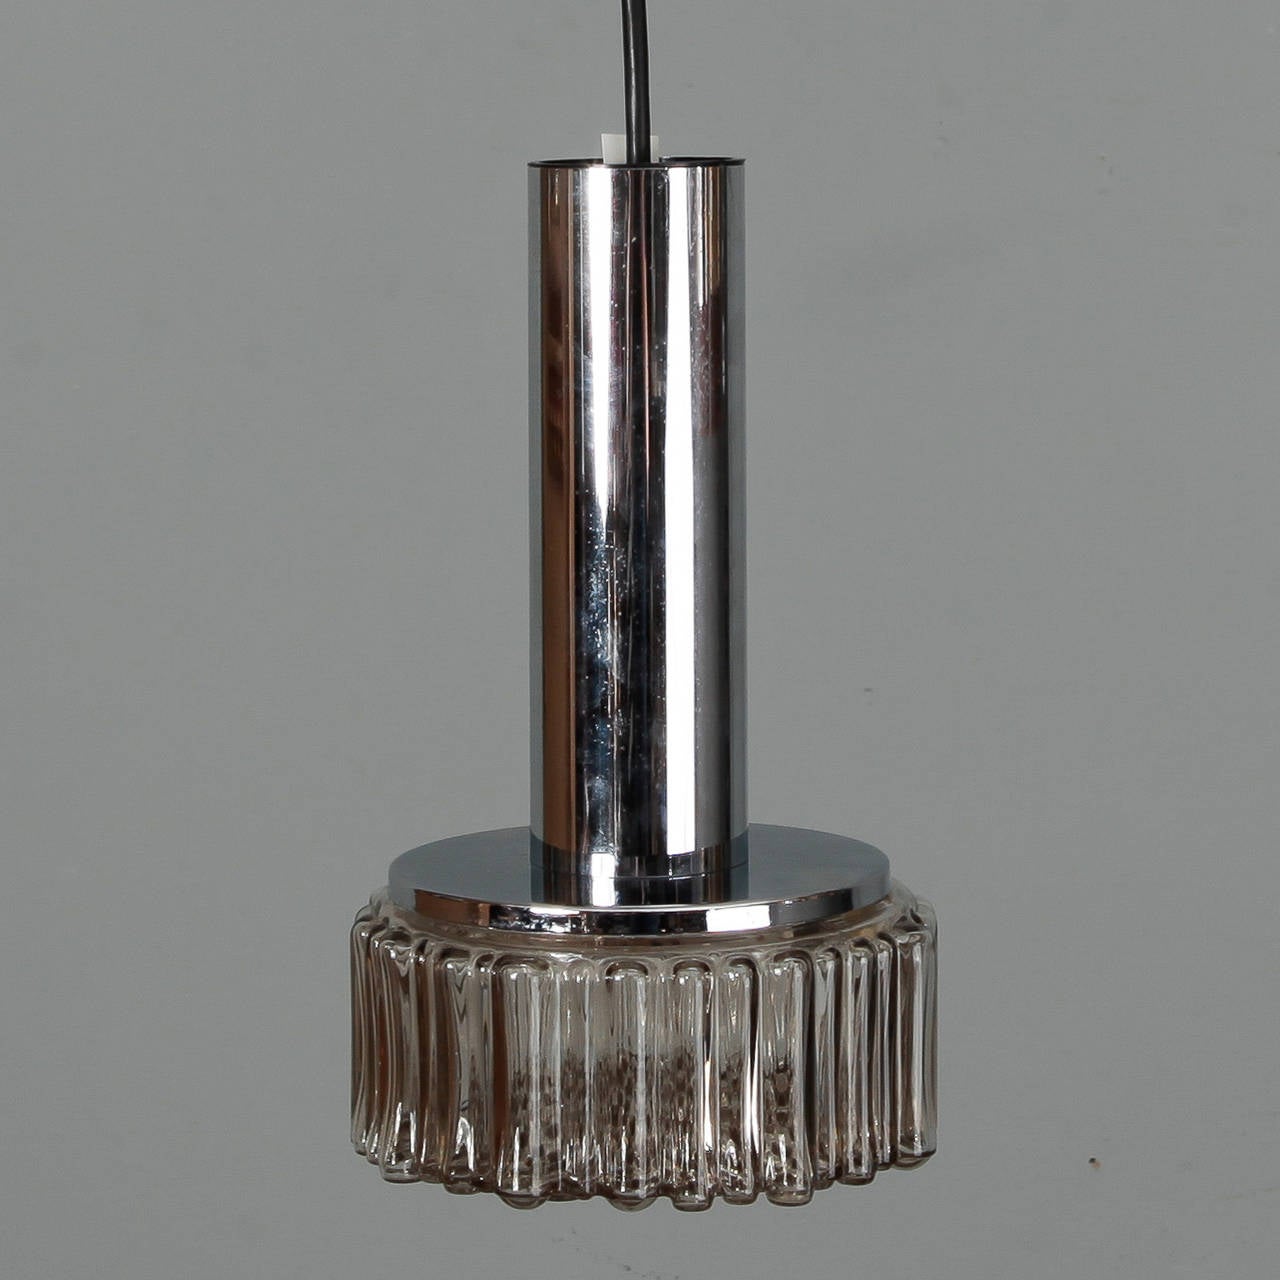 Circa 1960s German hanging pendant light fixture with a textured clear molded glass globe and cylindrical chrome shaft suspended from a black wire. We have several of these fixtures available and they can hung individually or as a group. New wiring